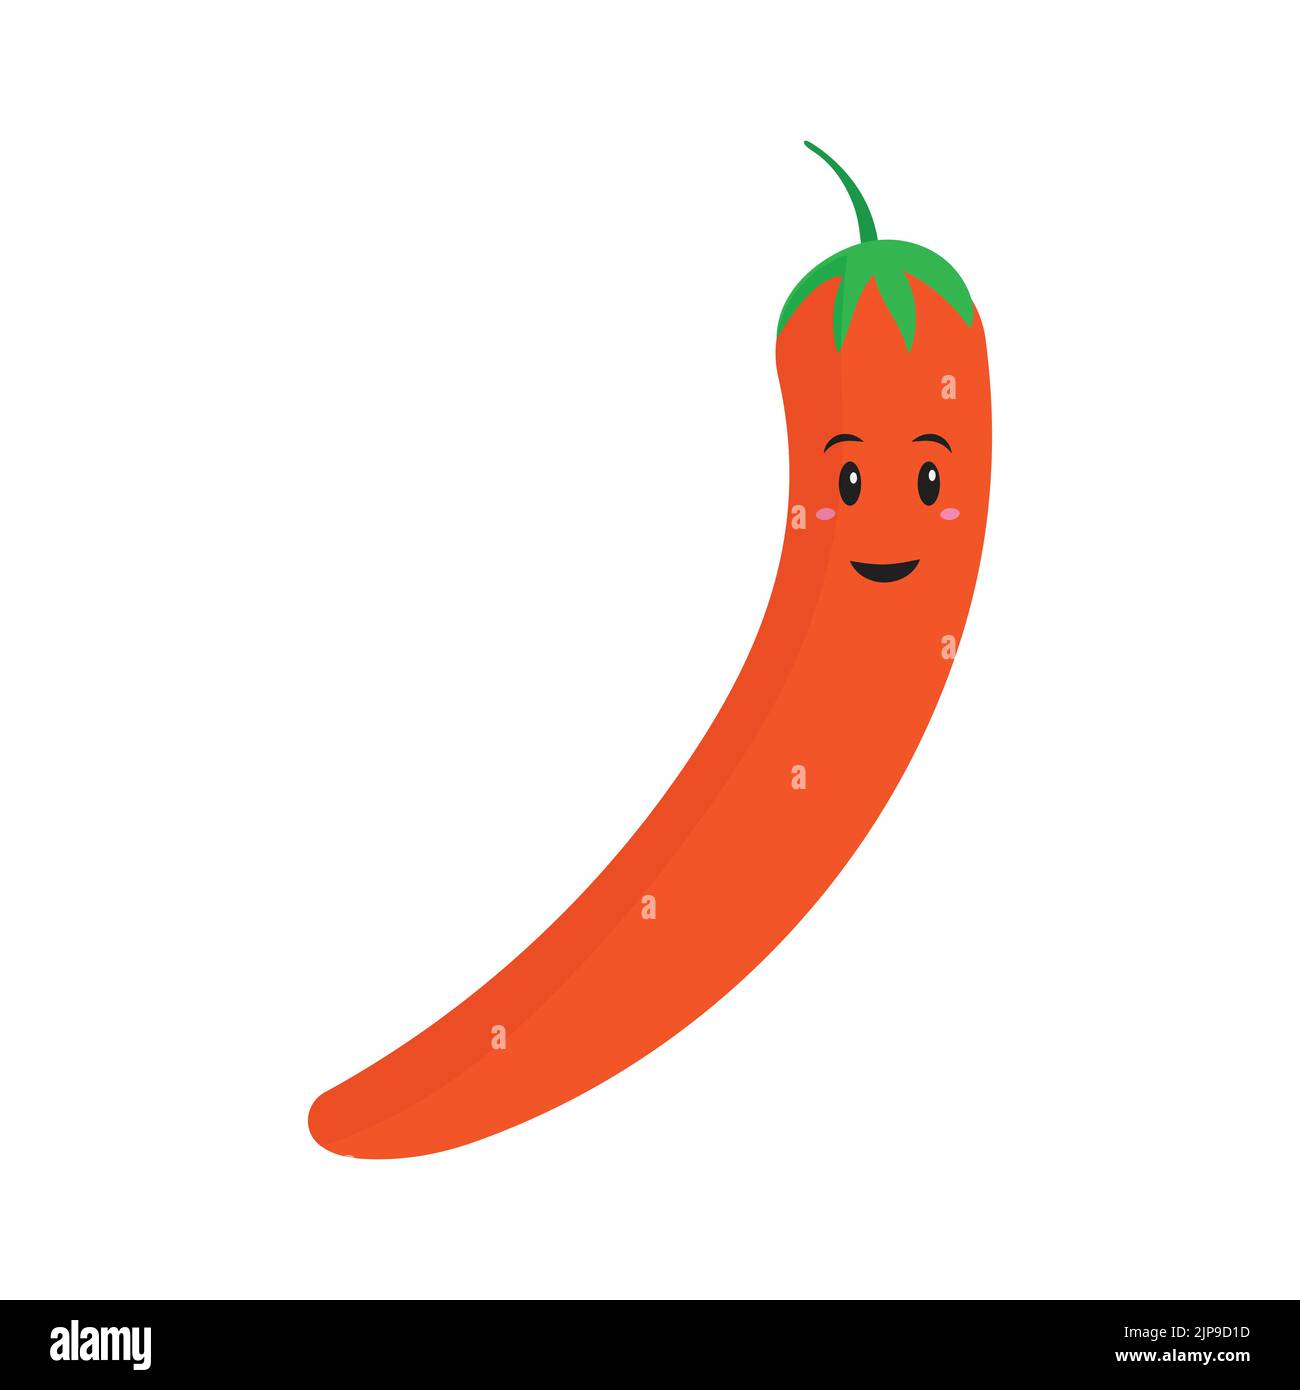 Flat Vector Of Happy Red Chili Cartoon Character. Stock Vector